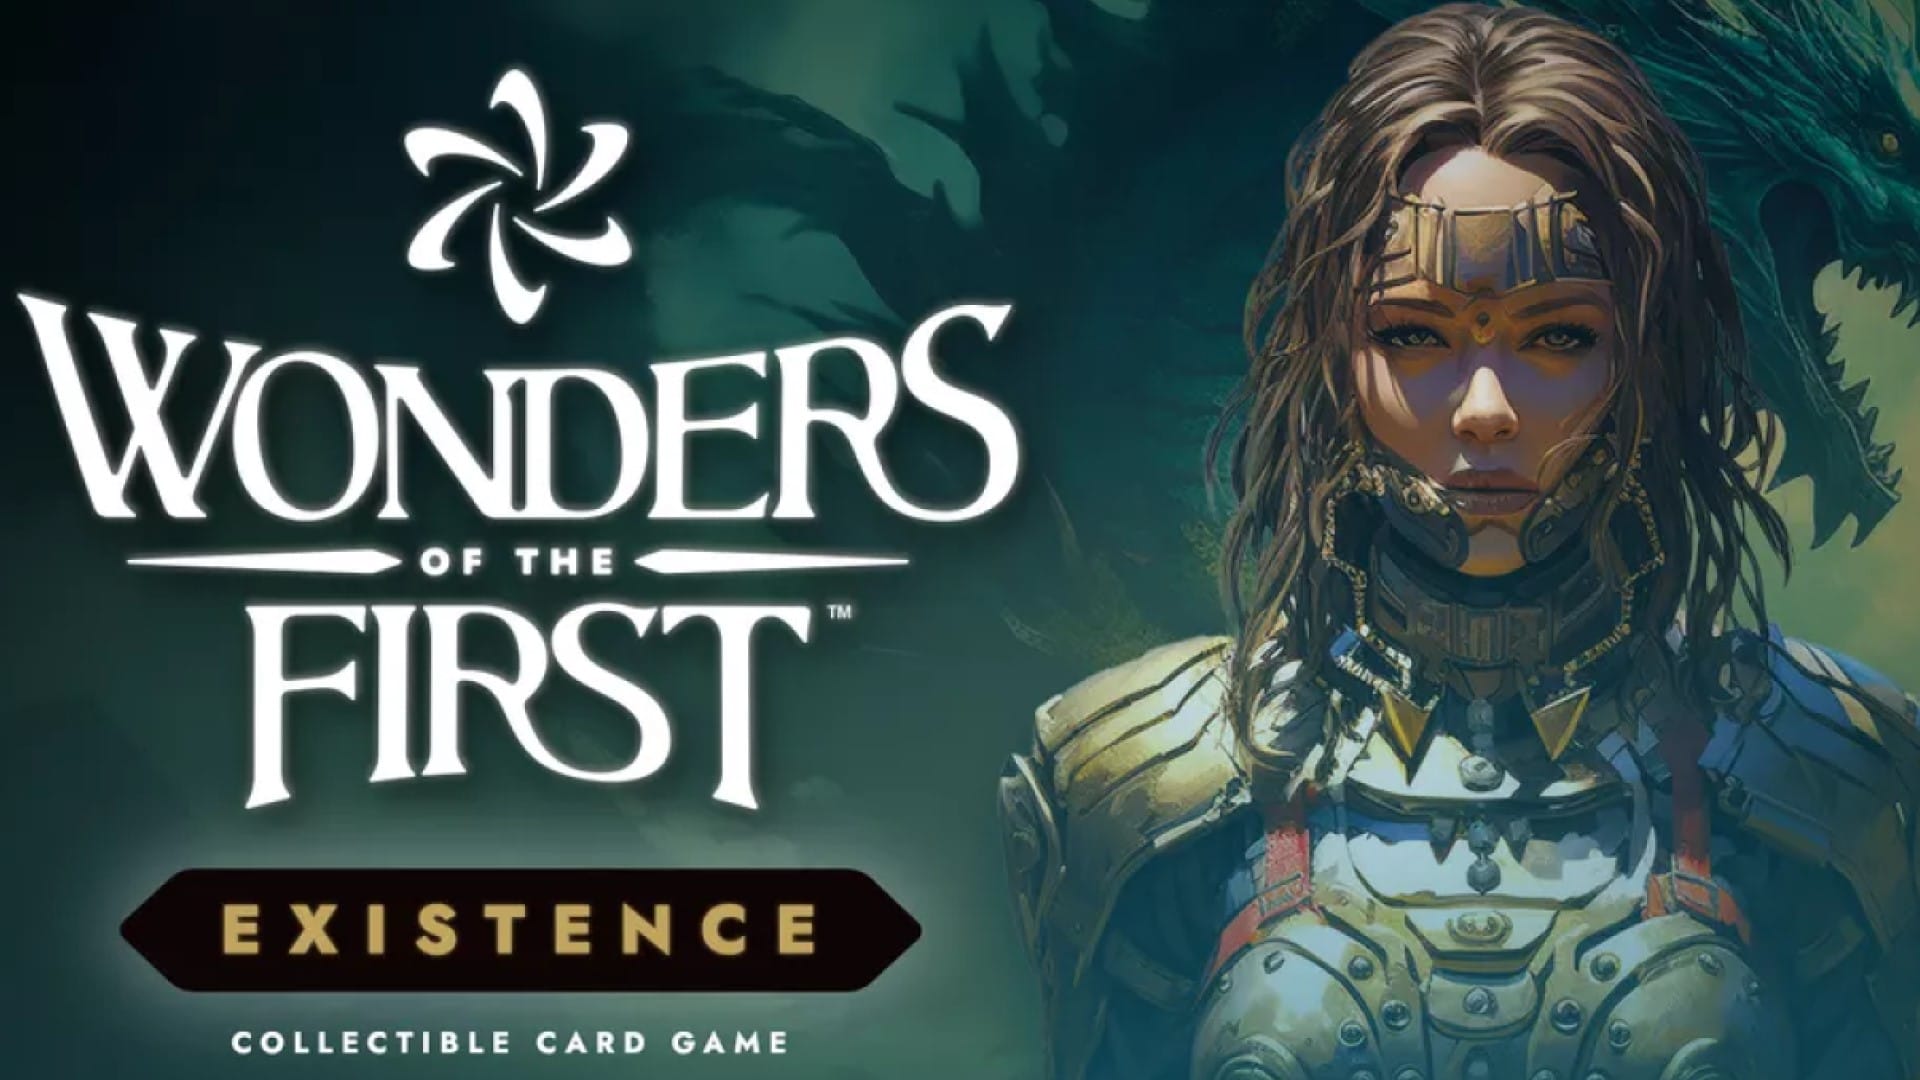 Promotional artwork of the Wonders of the First backer box, featuring a woman in armor with a dragon in the background.